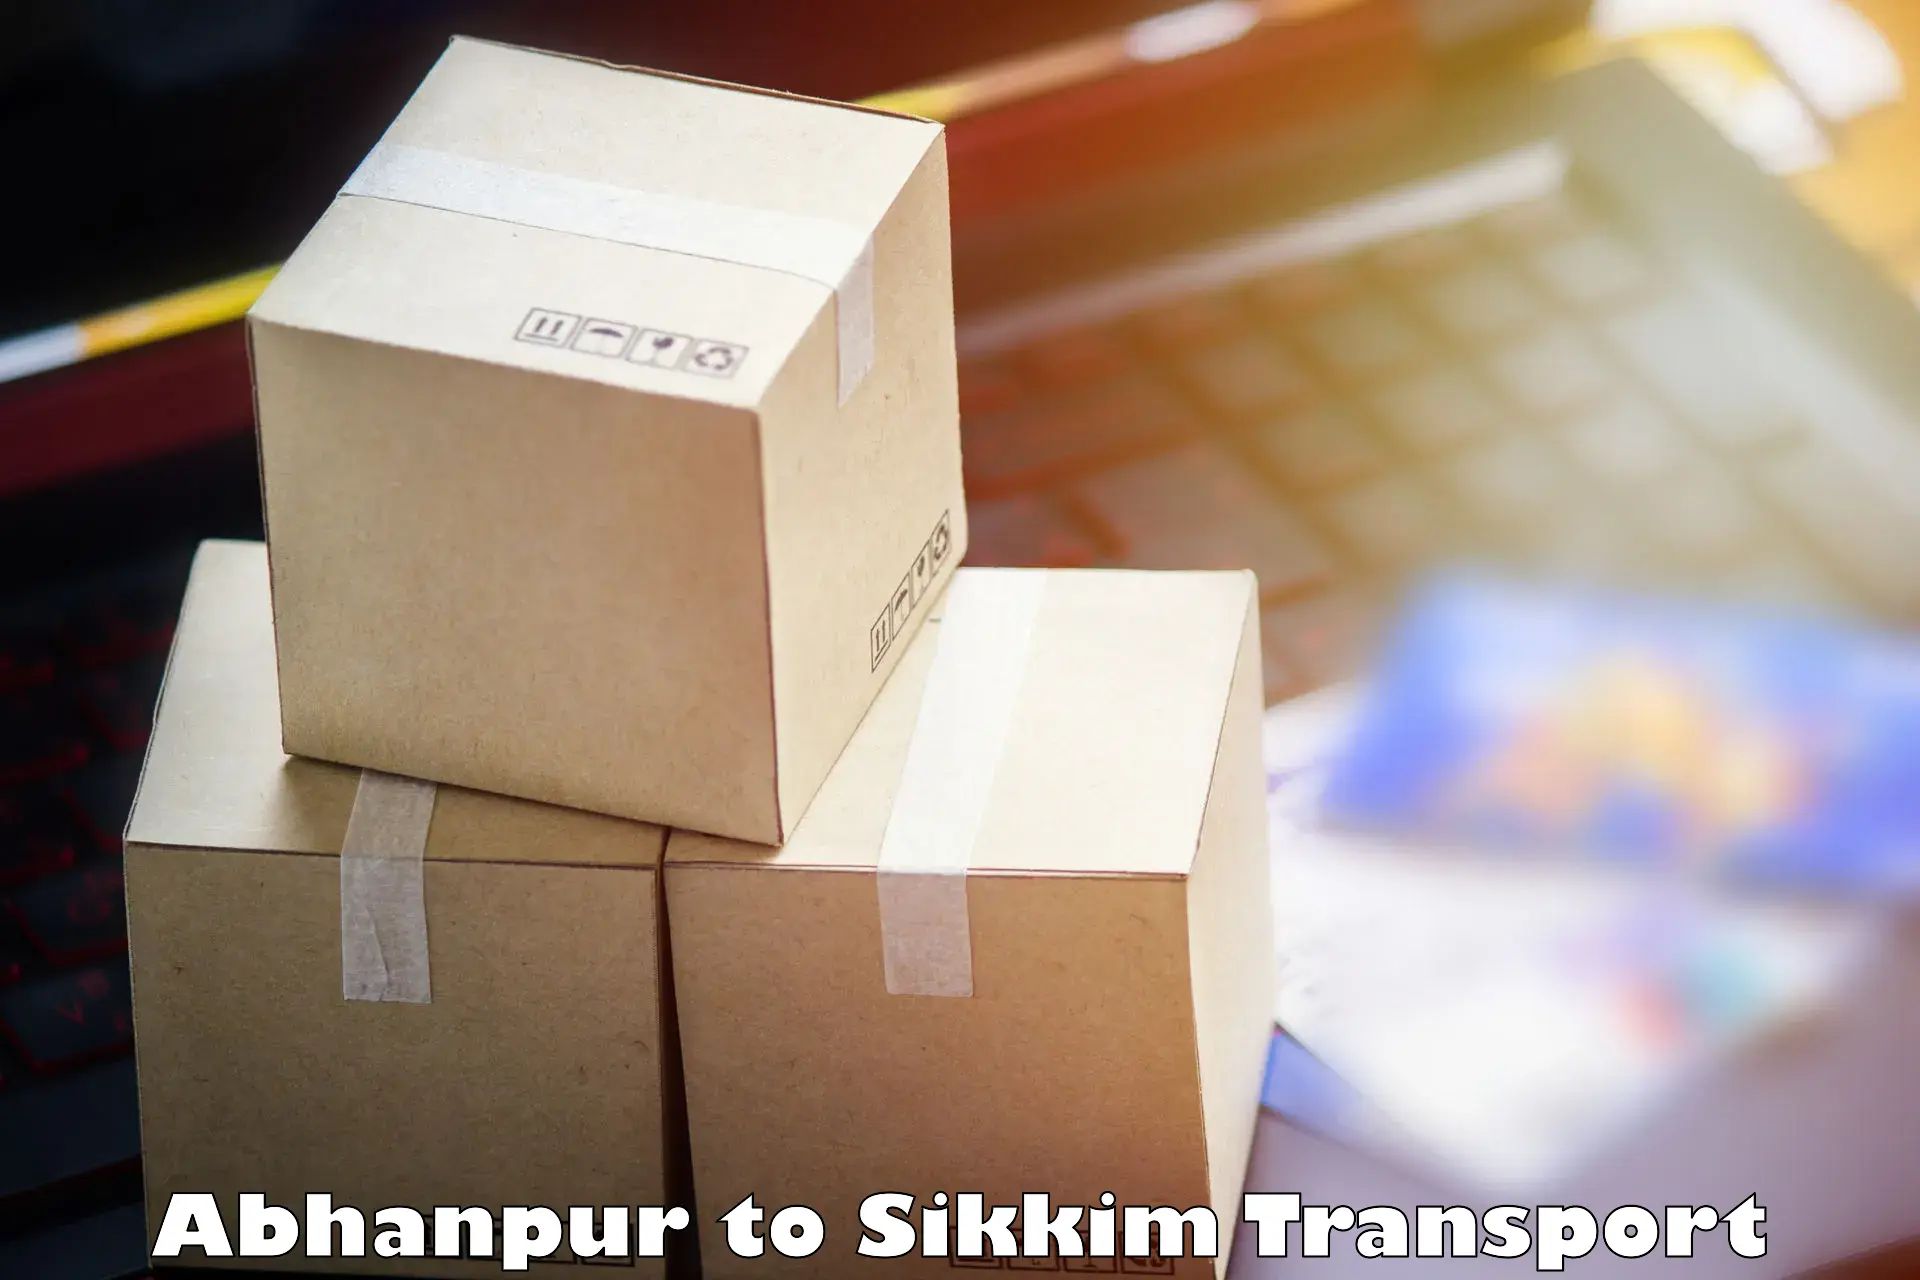 Commercial transport service Abhanpur to Sikkim